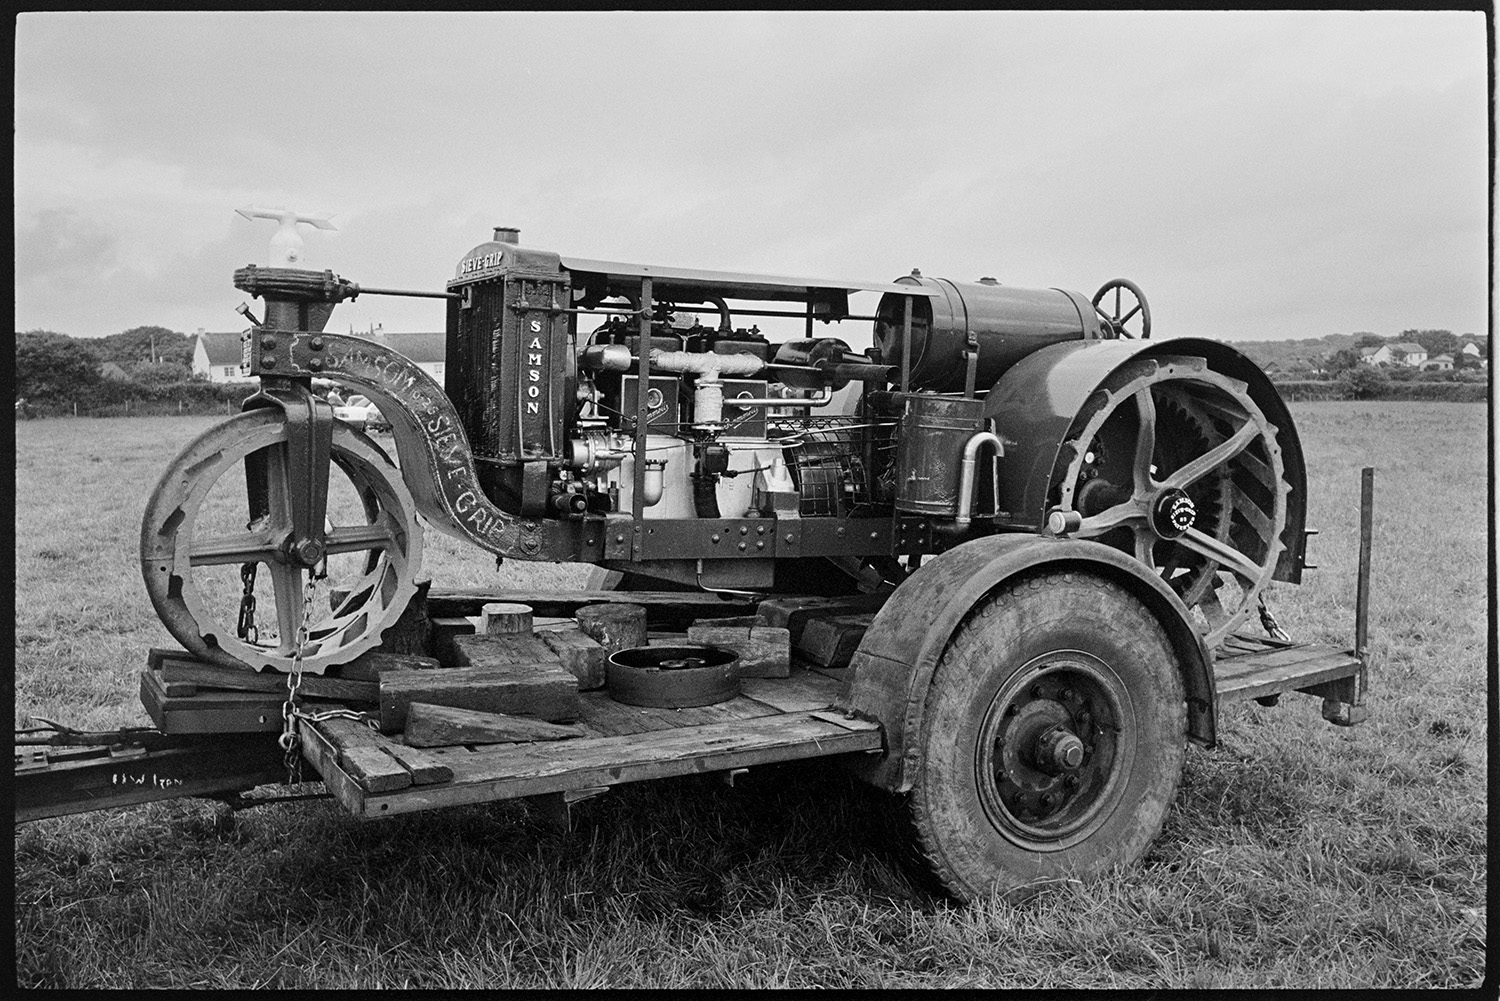 Village Club Day, sports, teas, clay pigeon shoot, committee in discussion.
[A Samsom Sieve Grip vintage tractor on a trailer in a field at the Village Club Day in Chawleigh.]